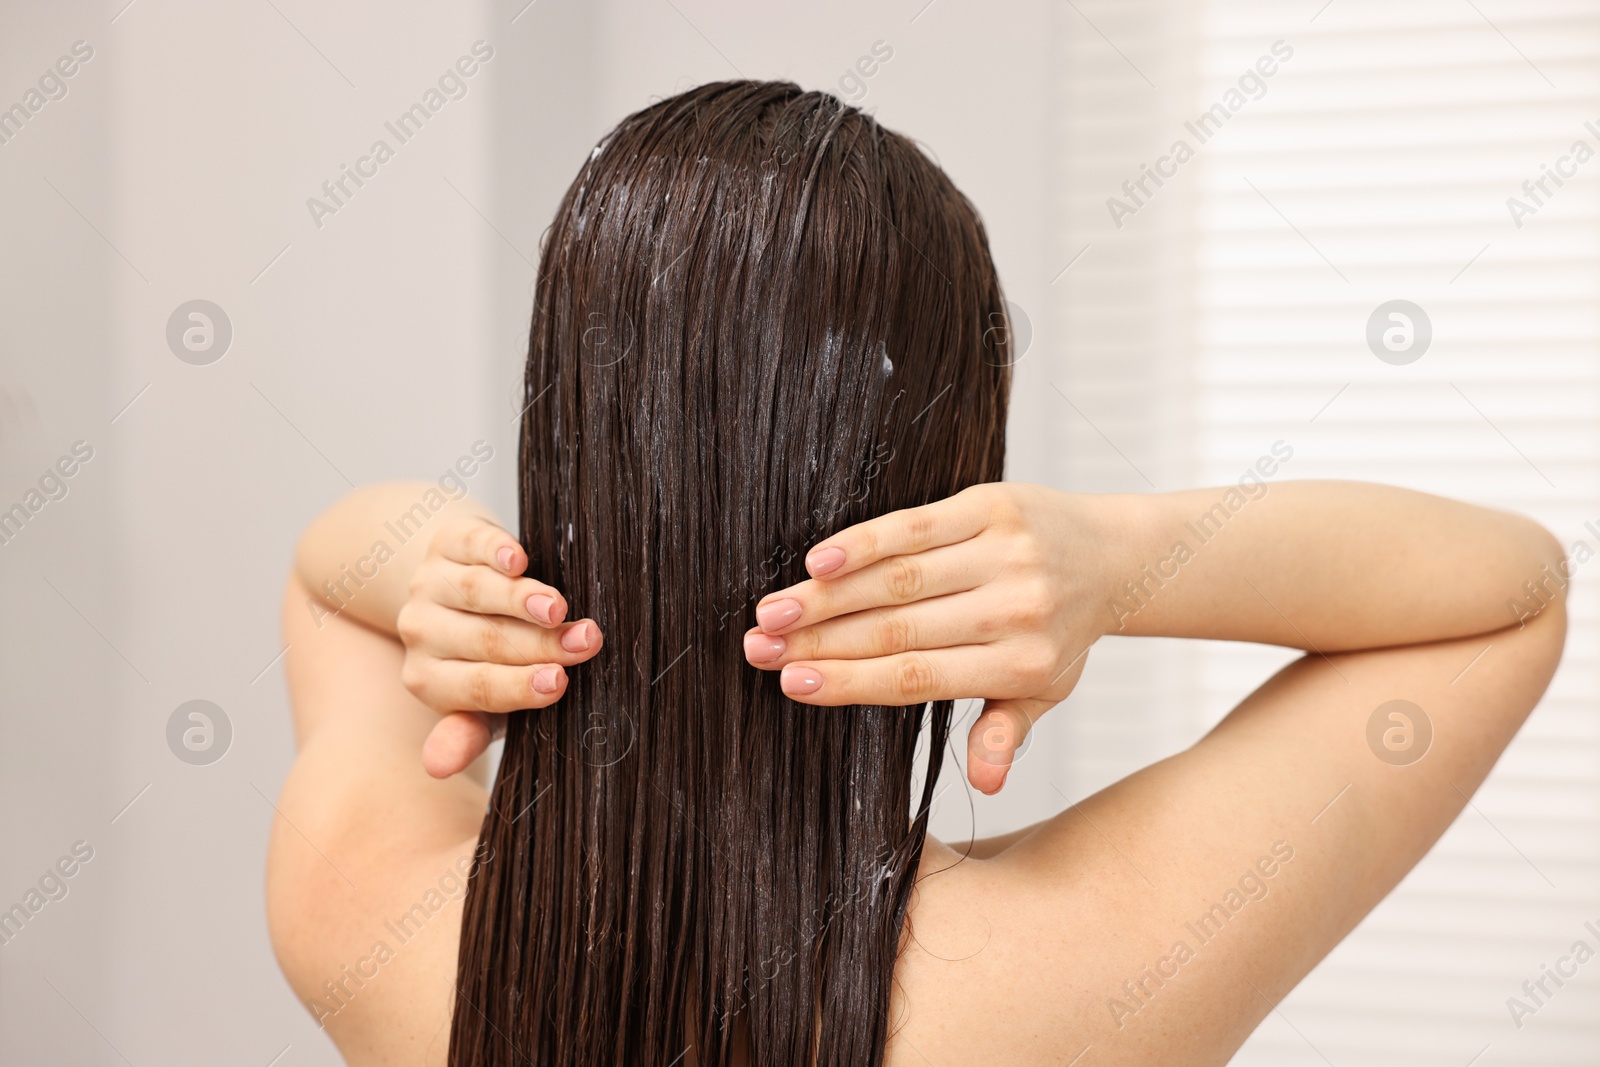 Photo of Woman applying hair mask in bathroom, back view